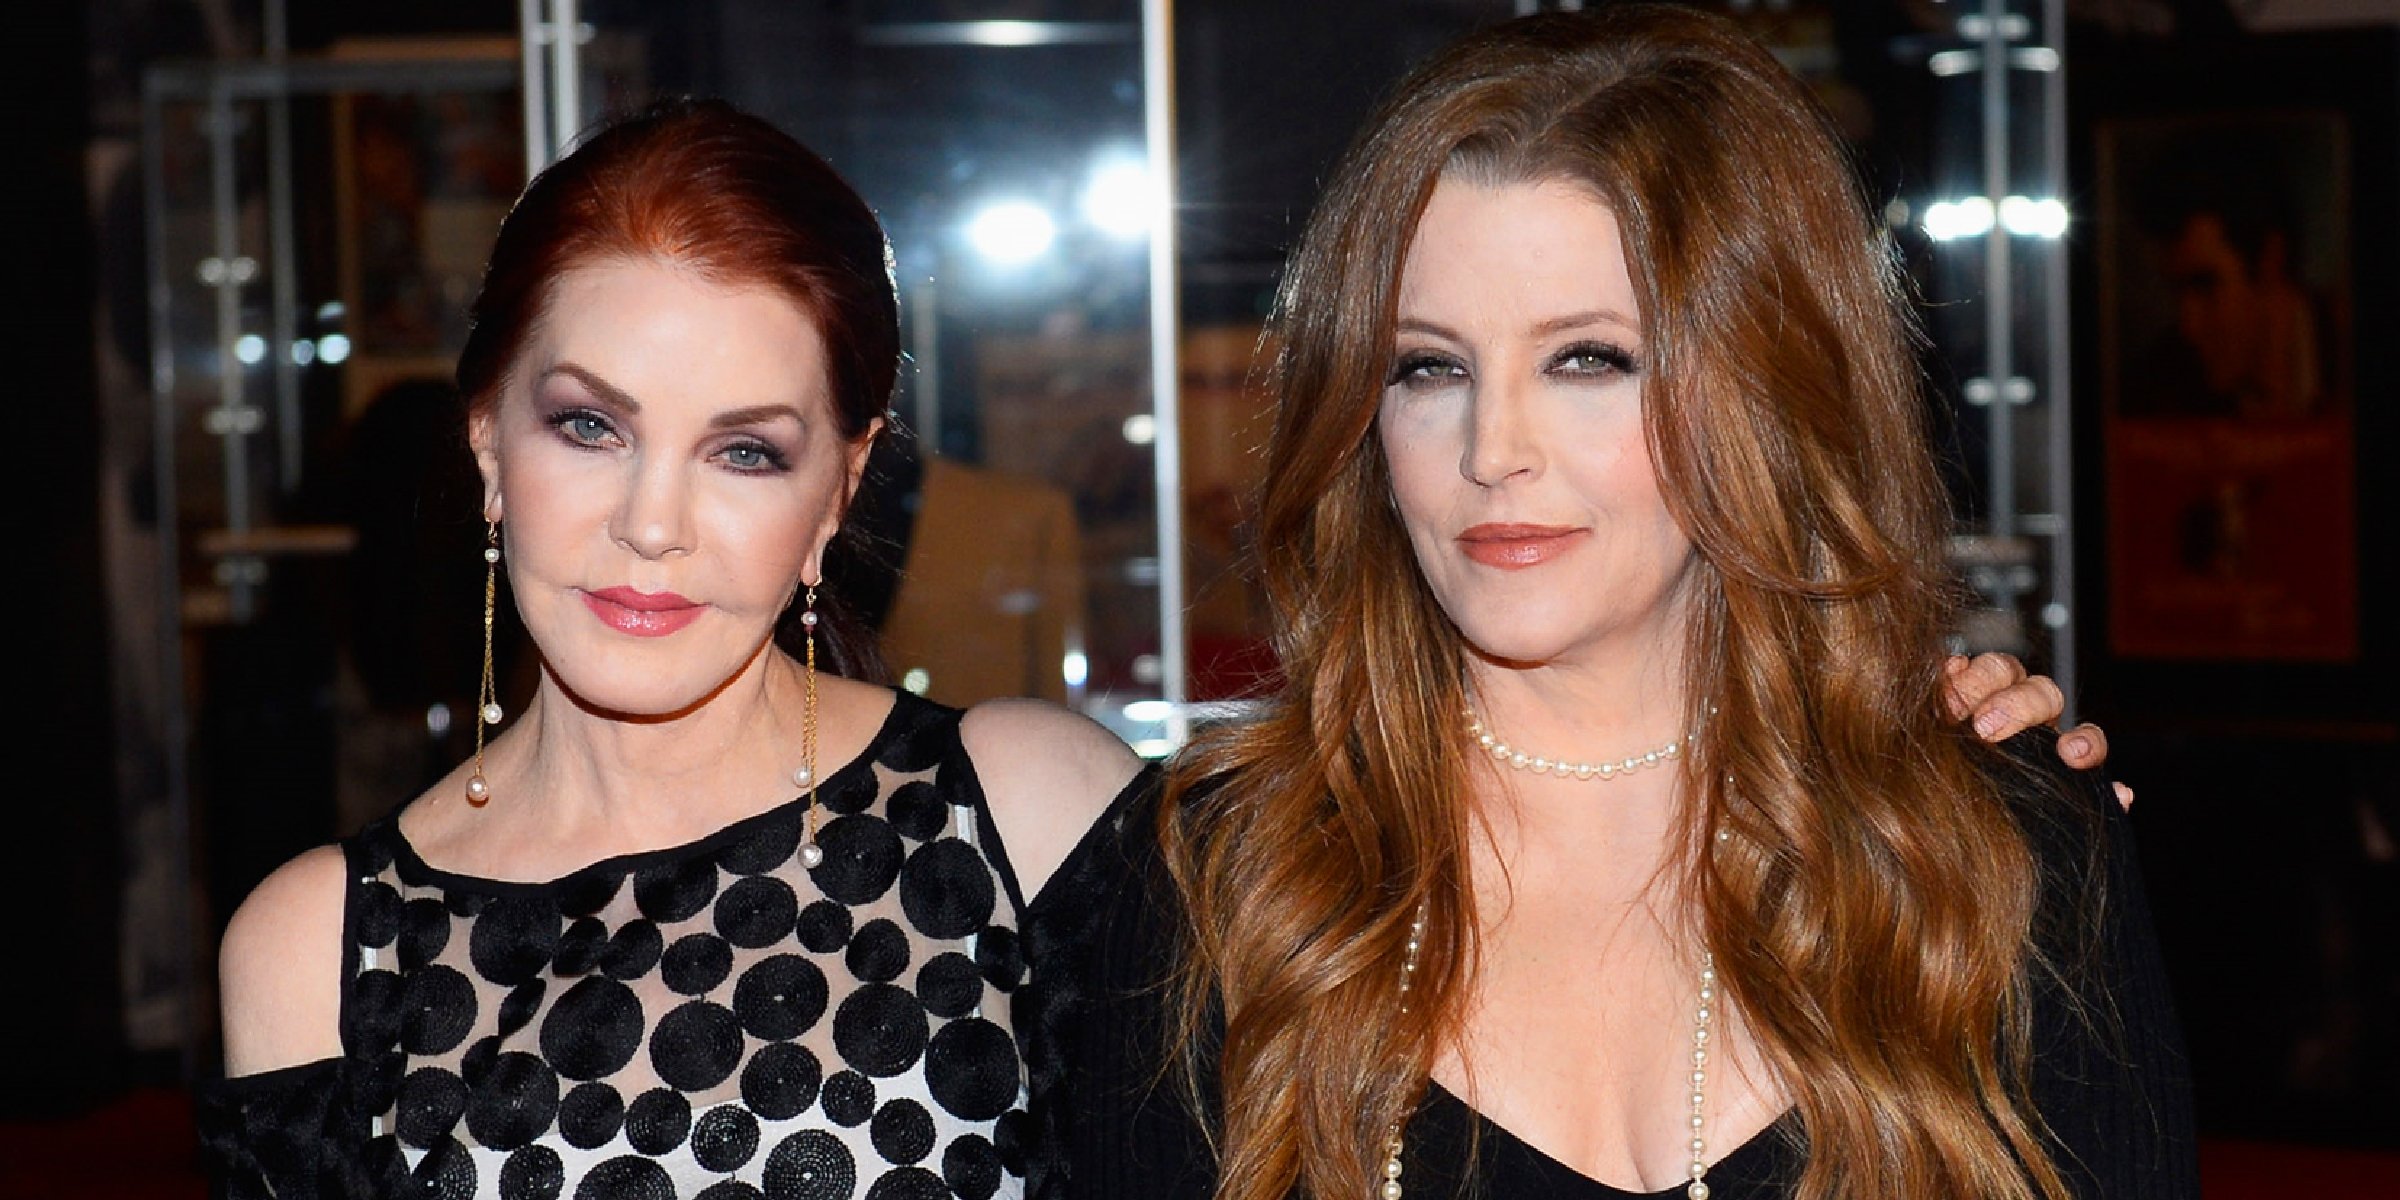 Priscilla Presley and Lisa Marie Presley | Source: Getty Images